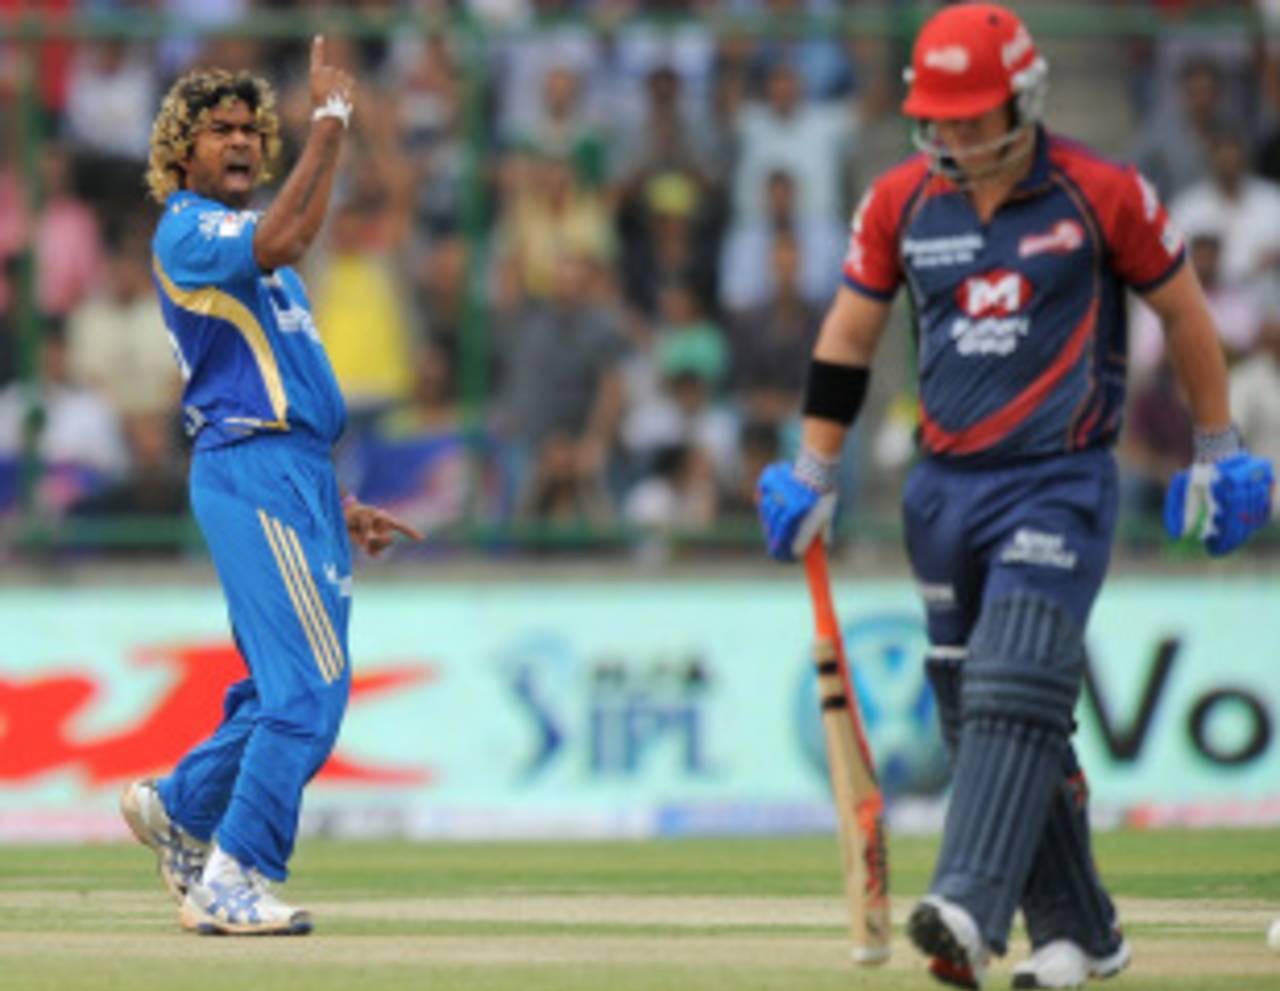 Lasith Malinga has continued to play in the IPL despite telling Sri Lanka Cricket he is not fit for the Tests in England&nbsp;&nbsp;&bull;&nbsp;&nbsp;AFP